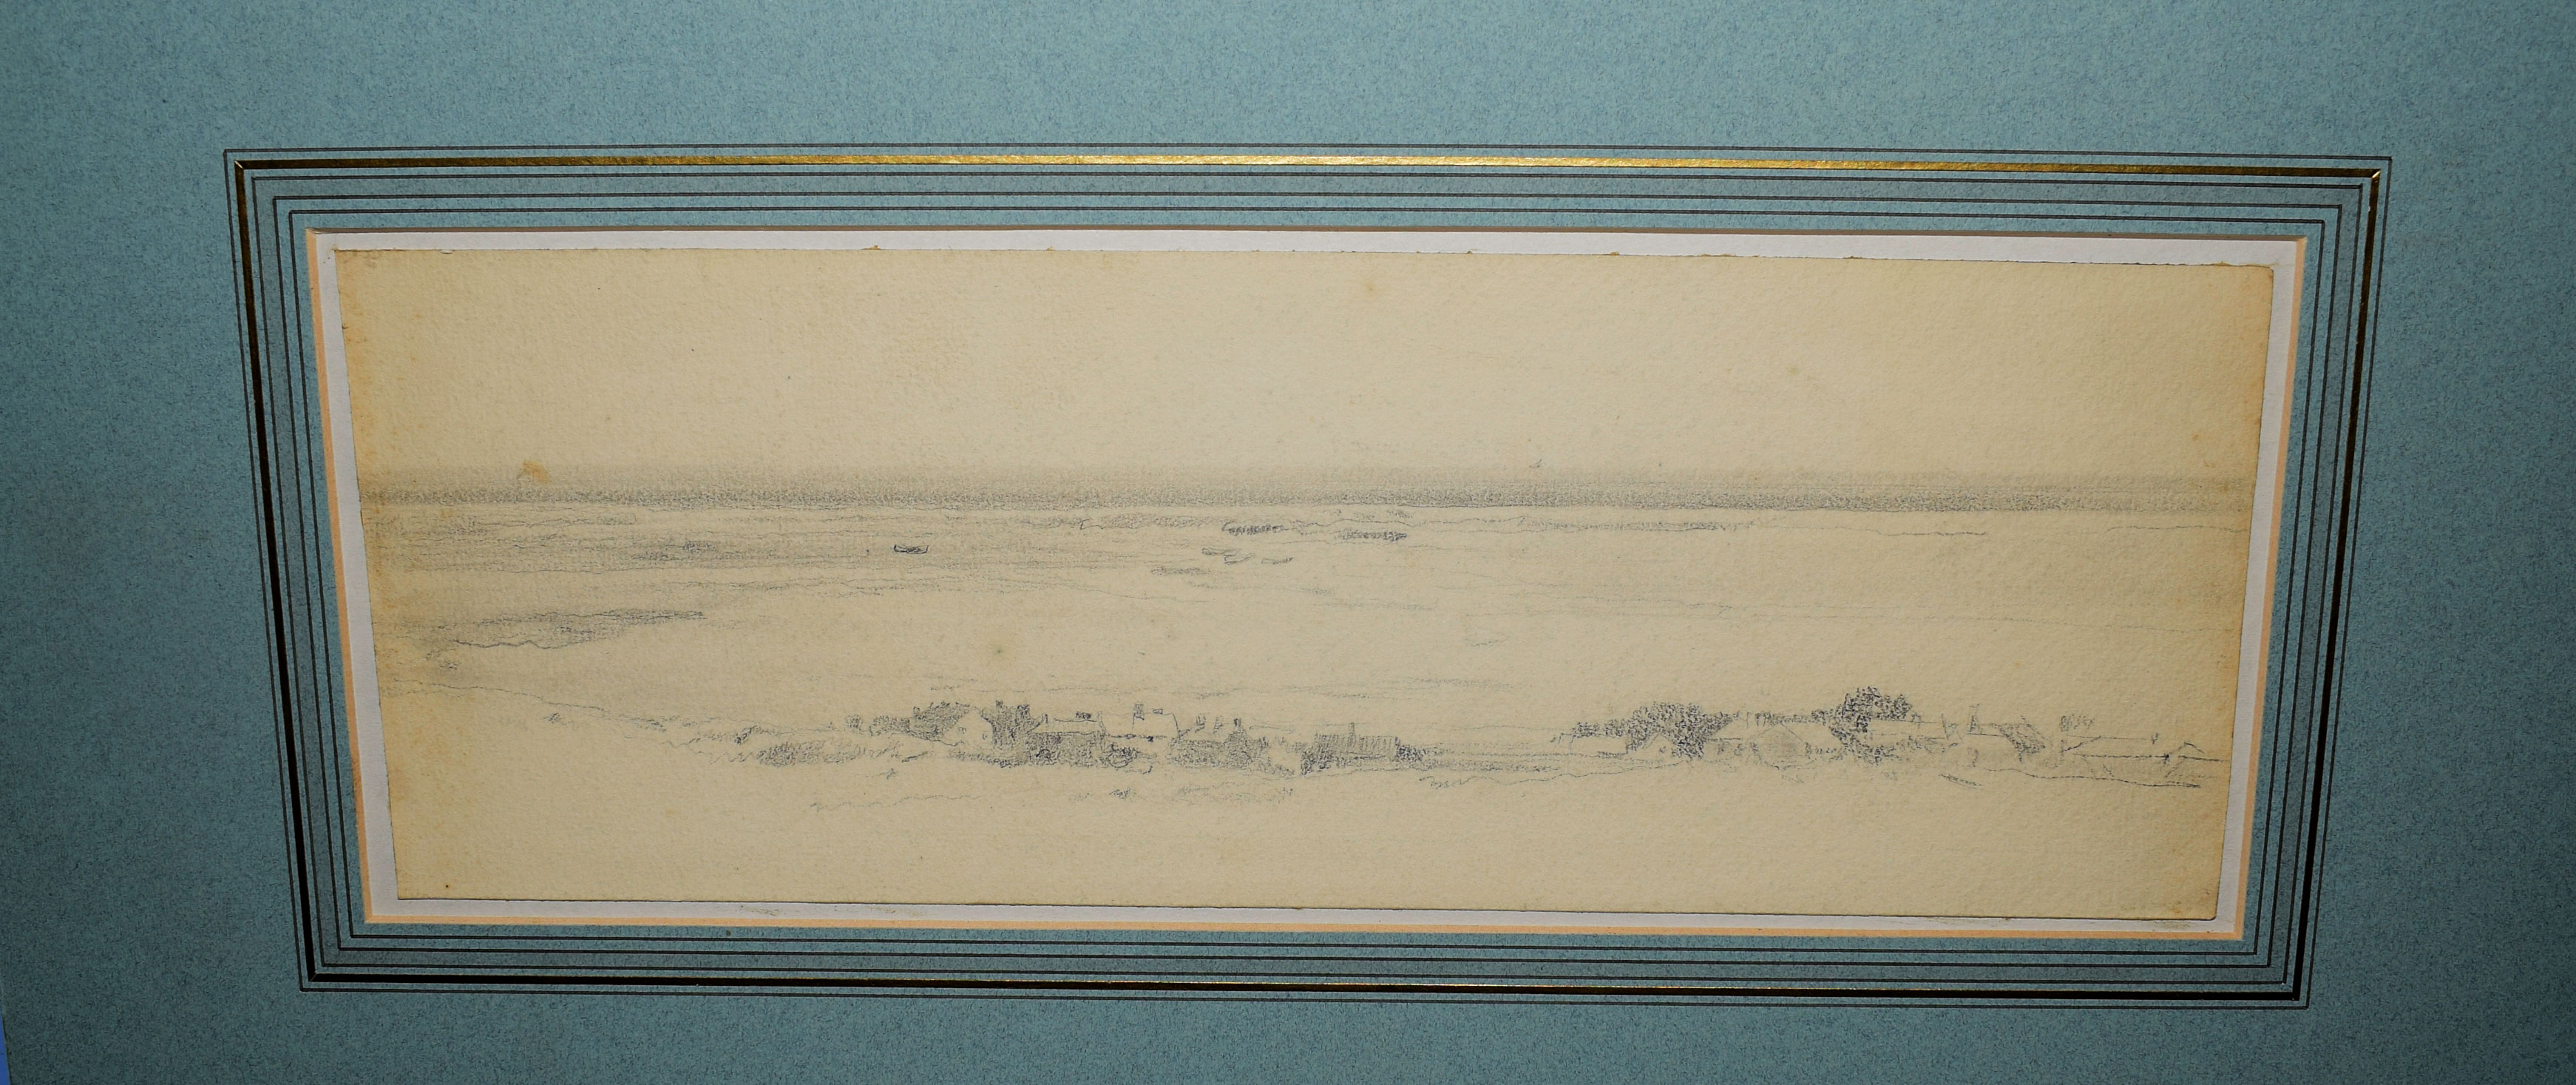 Henry Bright (1810-1873), 'Blakeney', pencil drawing, 13 x 34cm, mounted but unframed